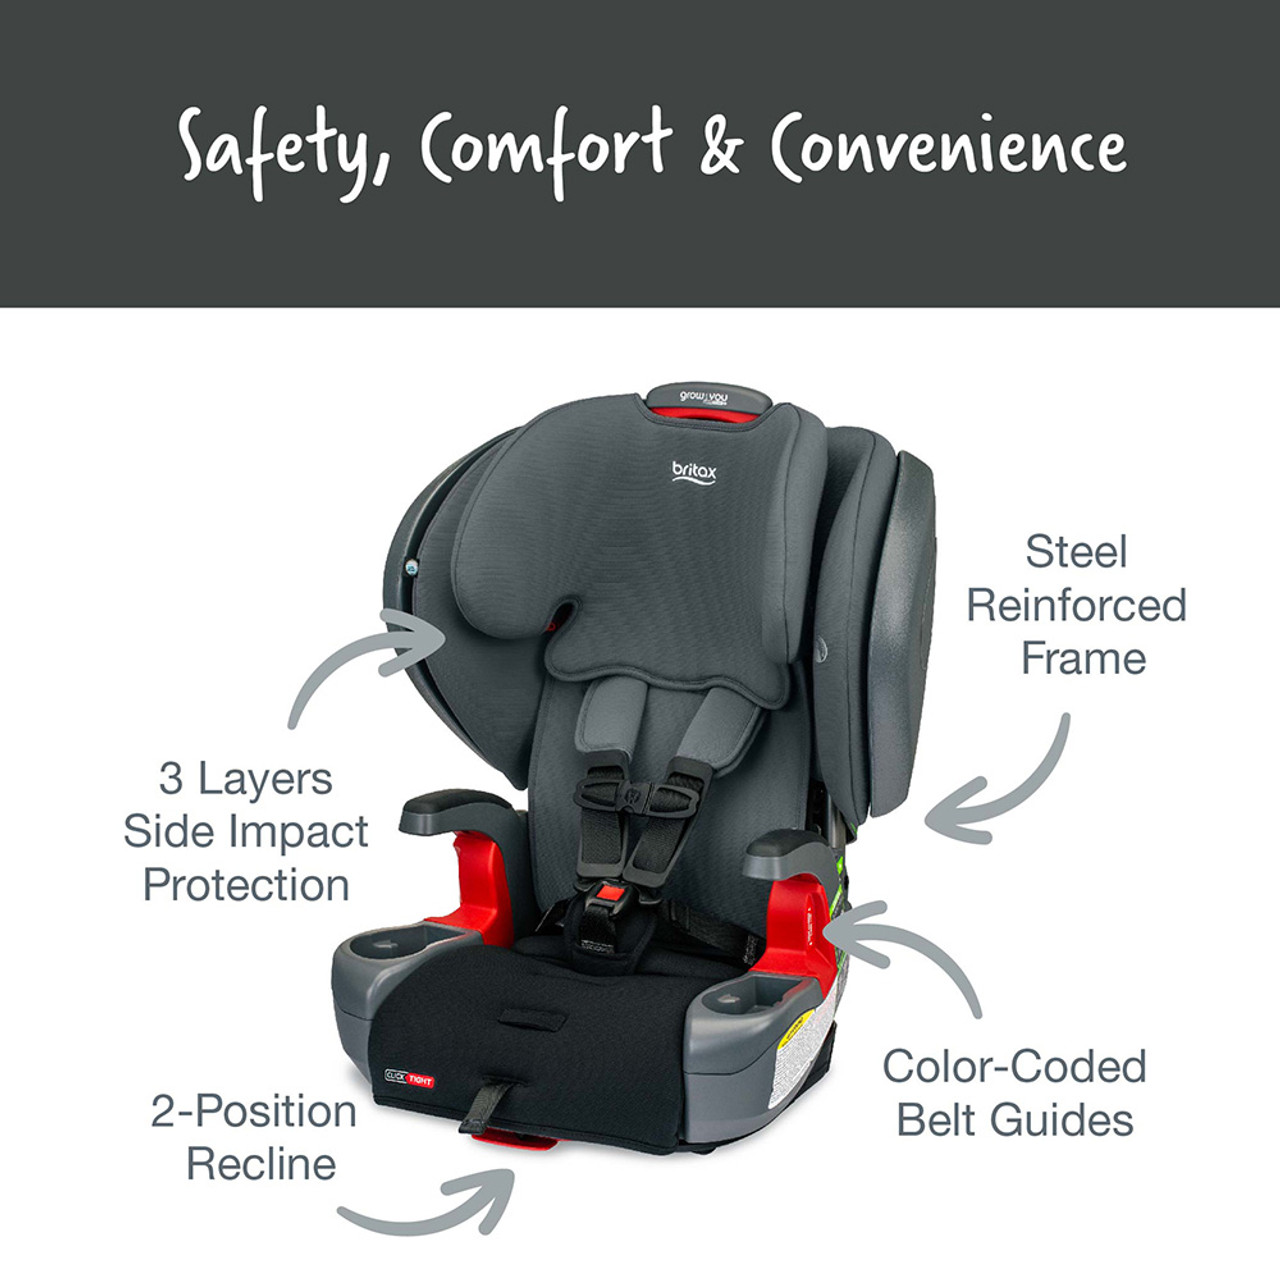 Buy BRITAX Grow With You Harness-to-Booster Car Seat with